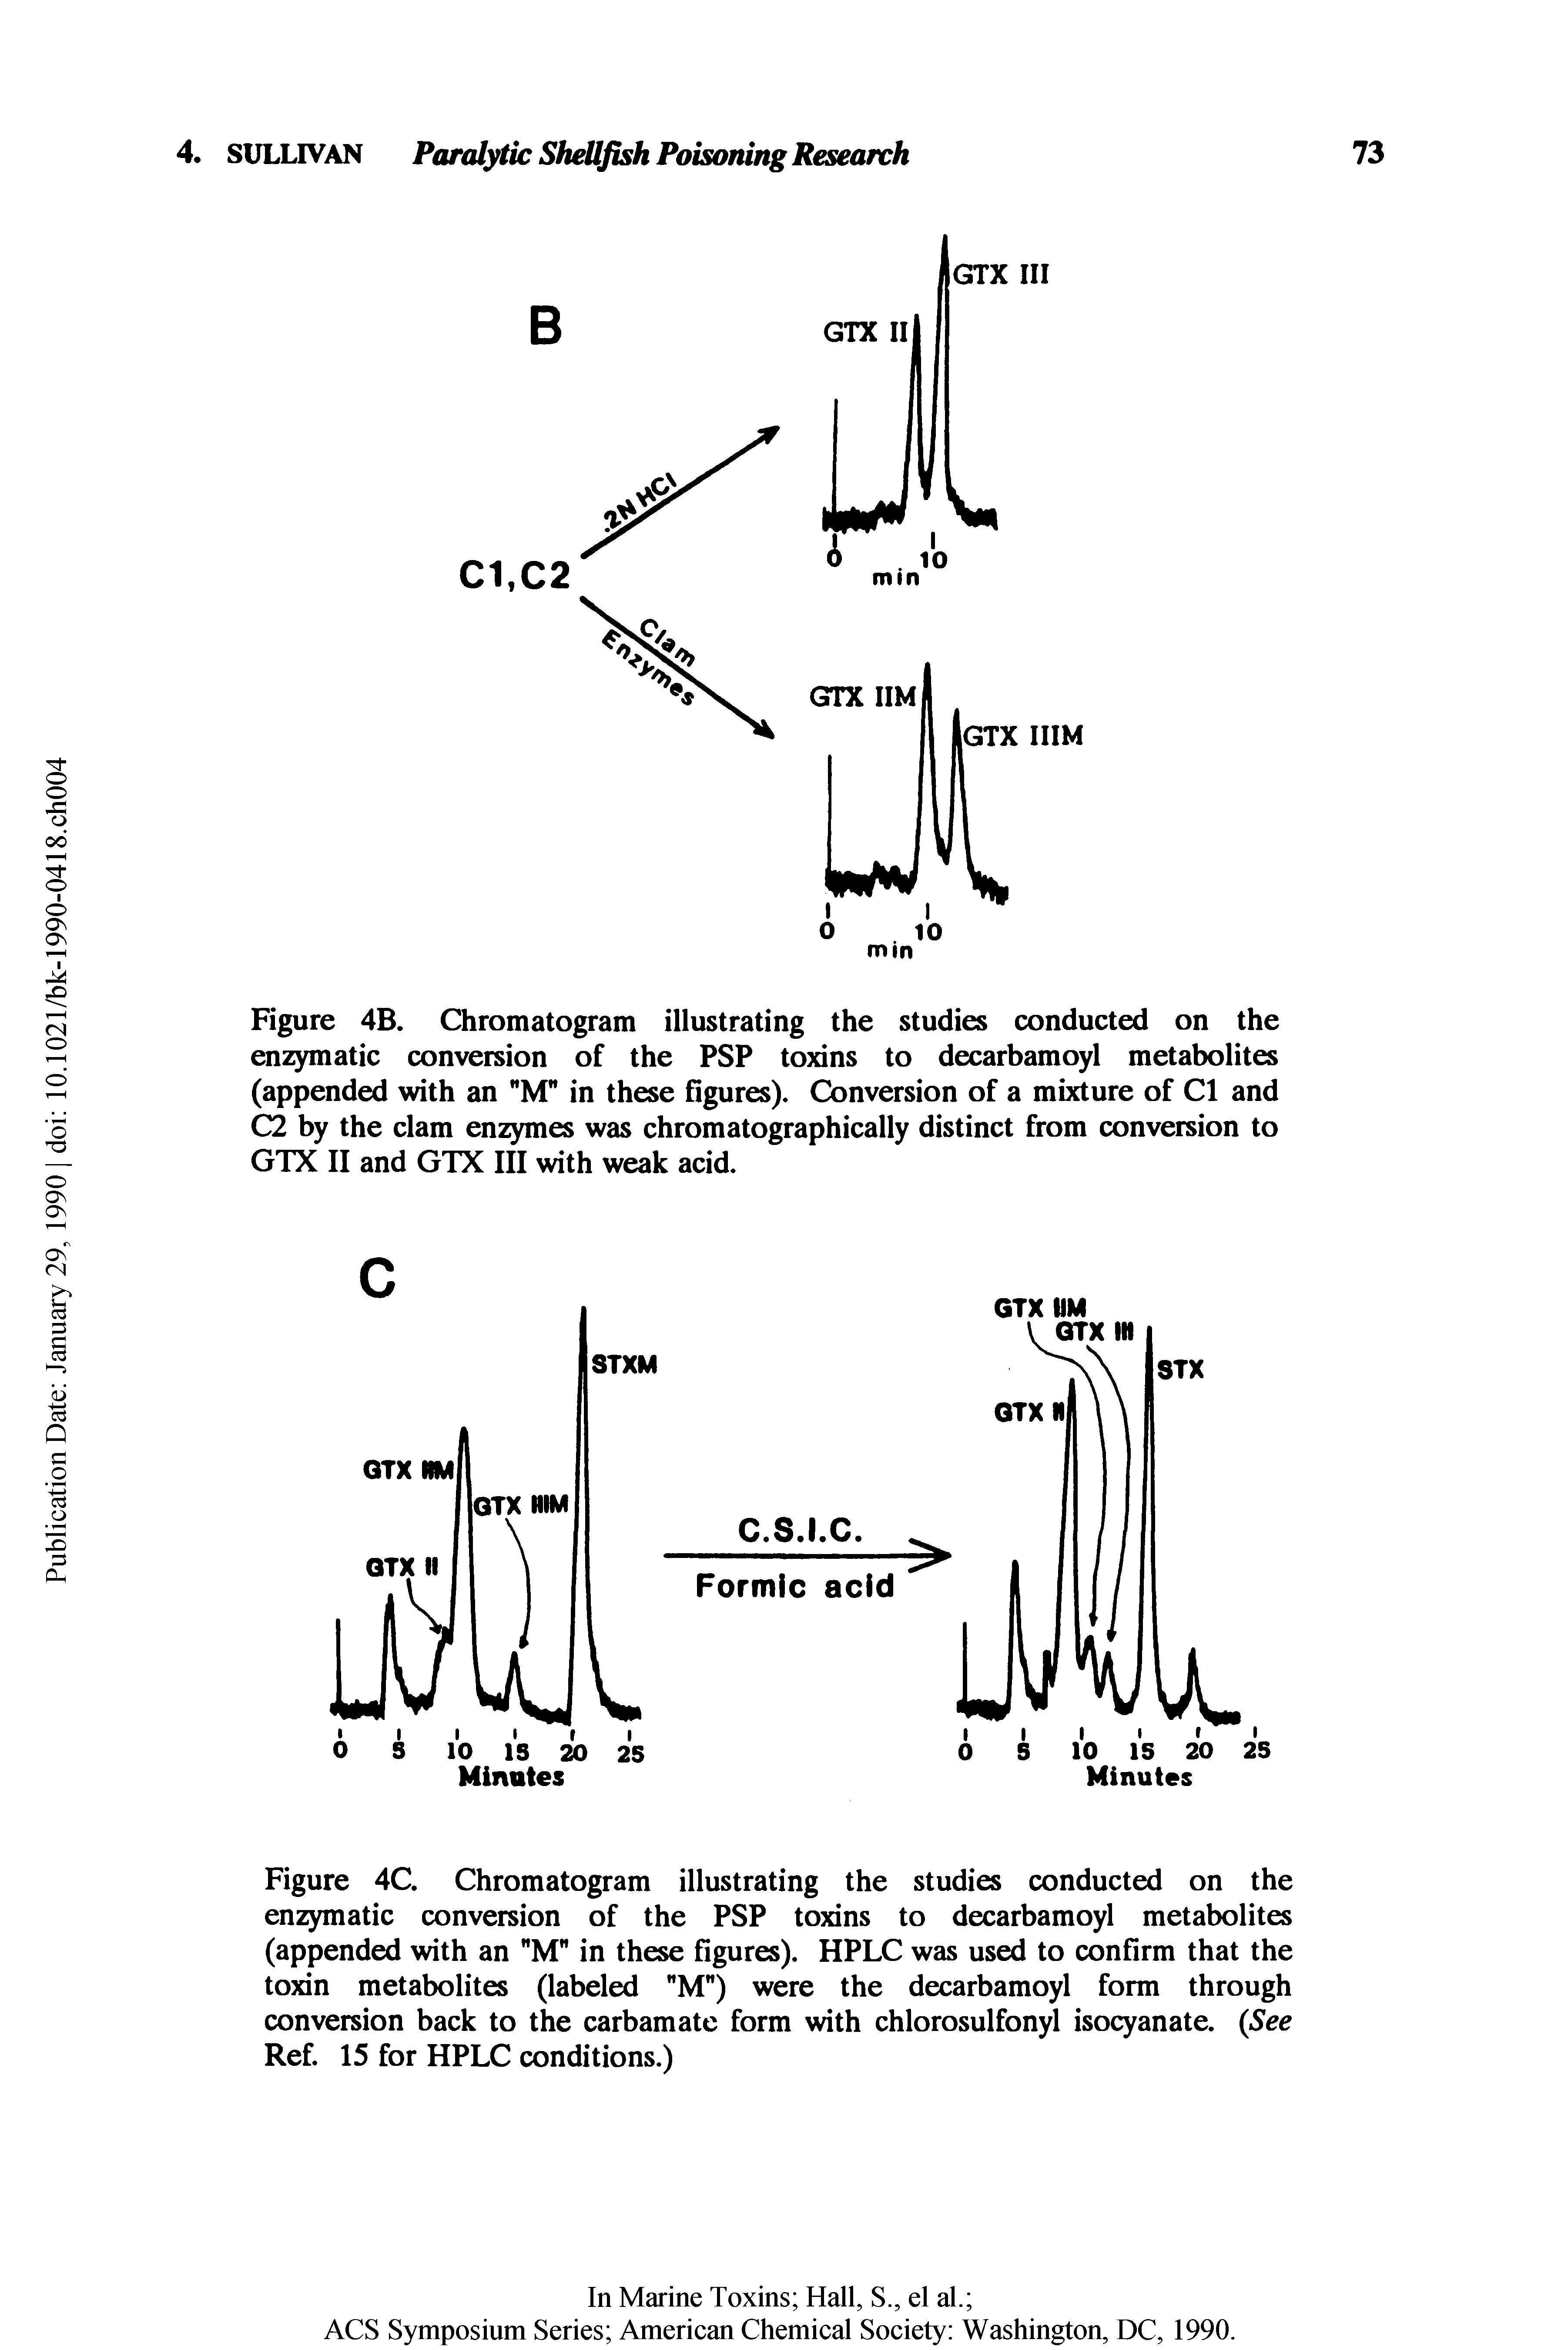 Figure 4B. Chromatogram illustrating the studies conducted on the enzymatic conversion of the PSP toxins to decarbamoyl metabolites (appended with an M in these figures). Conversion of a mixture of Cl and C2 by the clam enzymes was chromatographically distinct from conversion to GTX II and GTX III with weak acid.